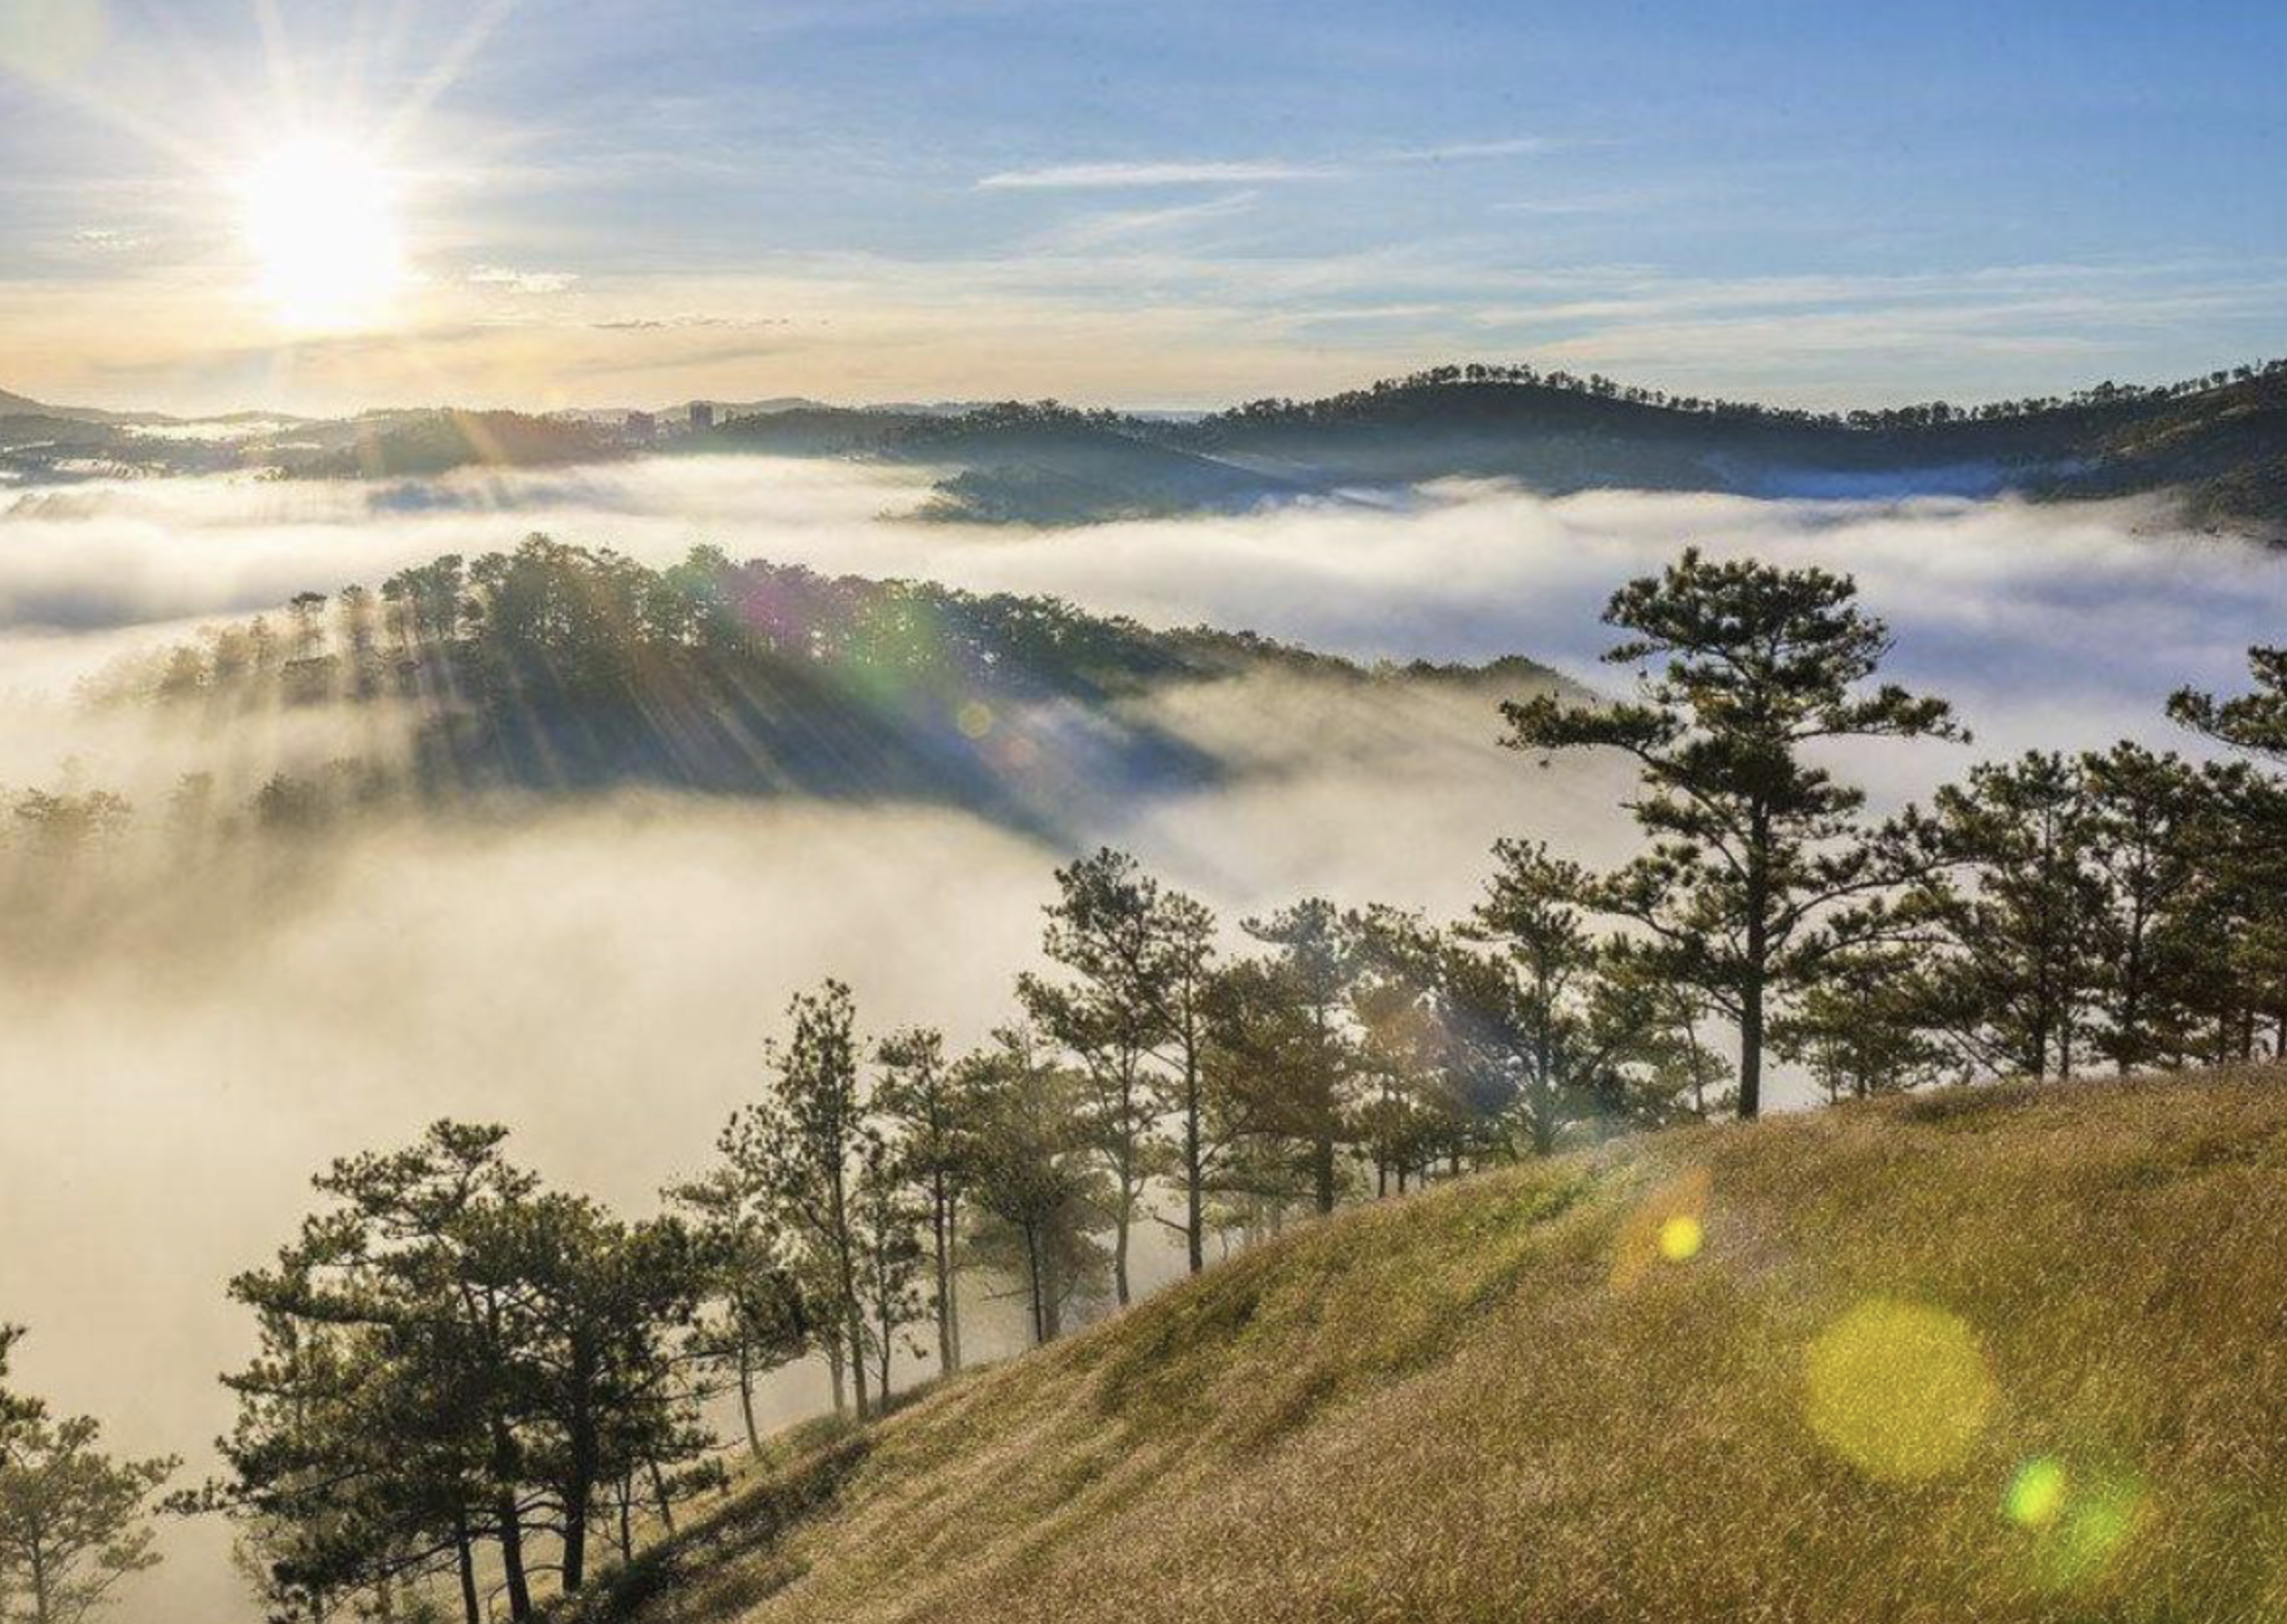 Da Lat City is one of the most sought-after destinations for tourists during the Lunar New Year holiday, Tet. Photo: Tuoi Tre